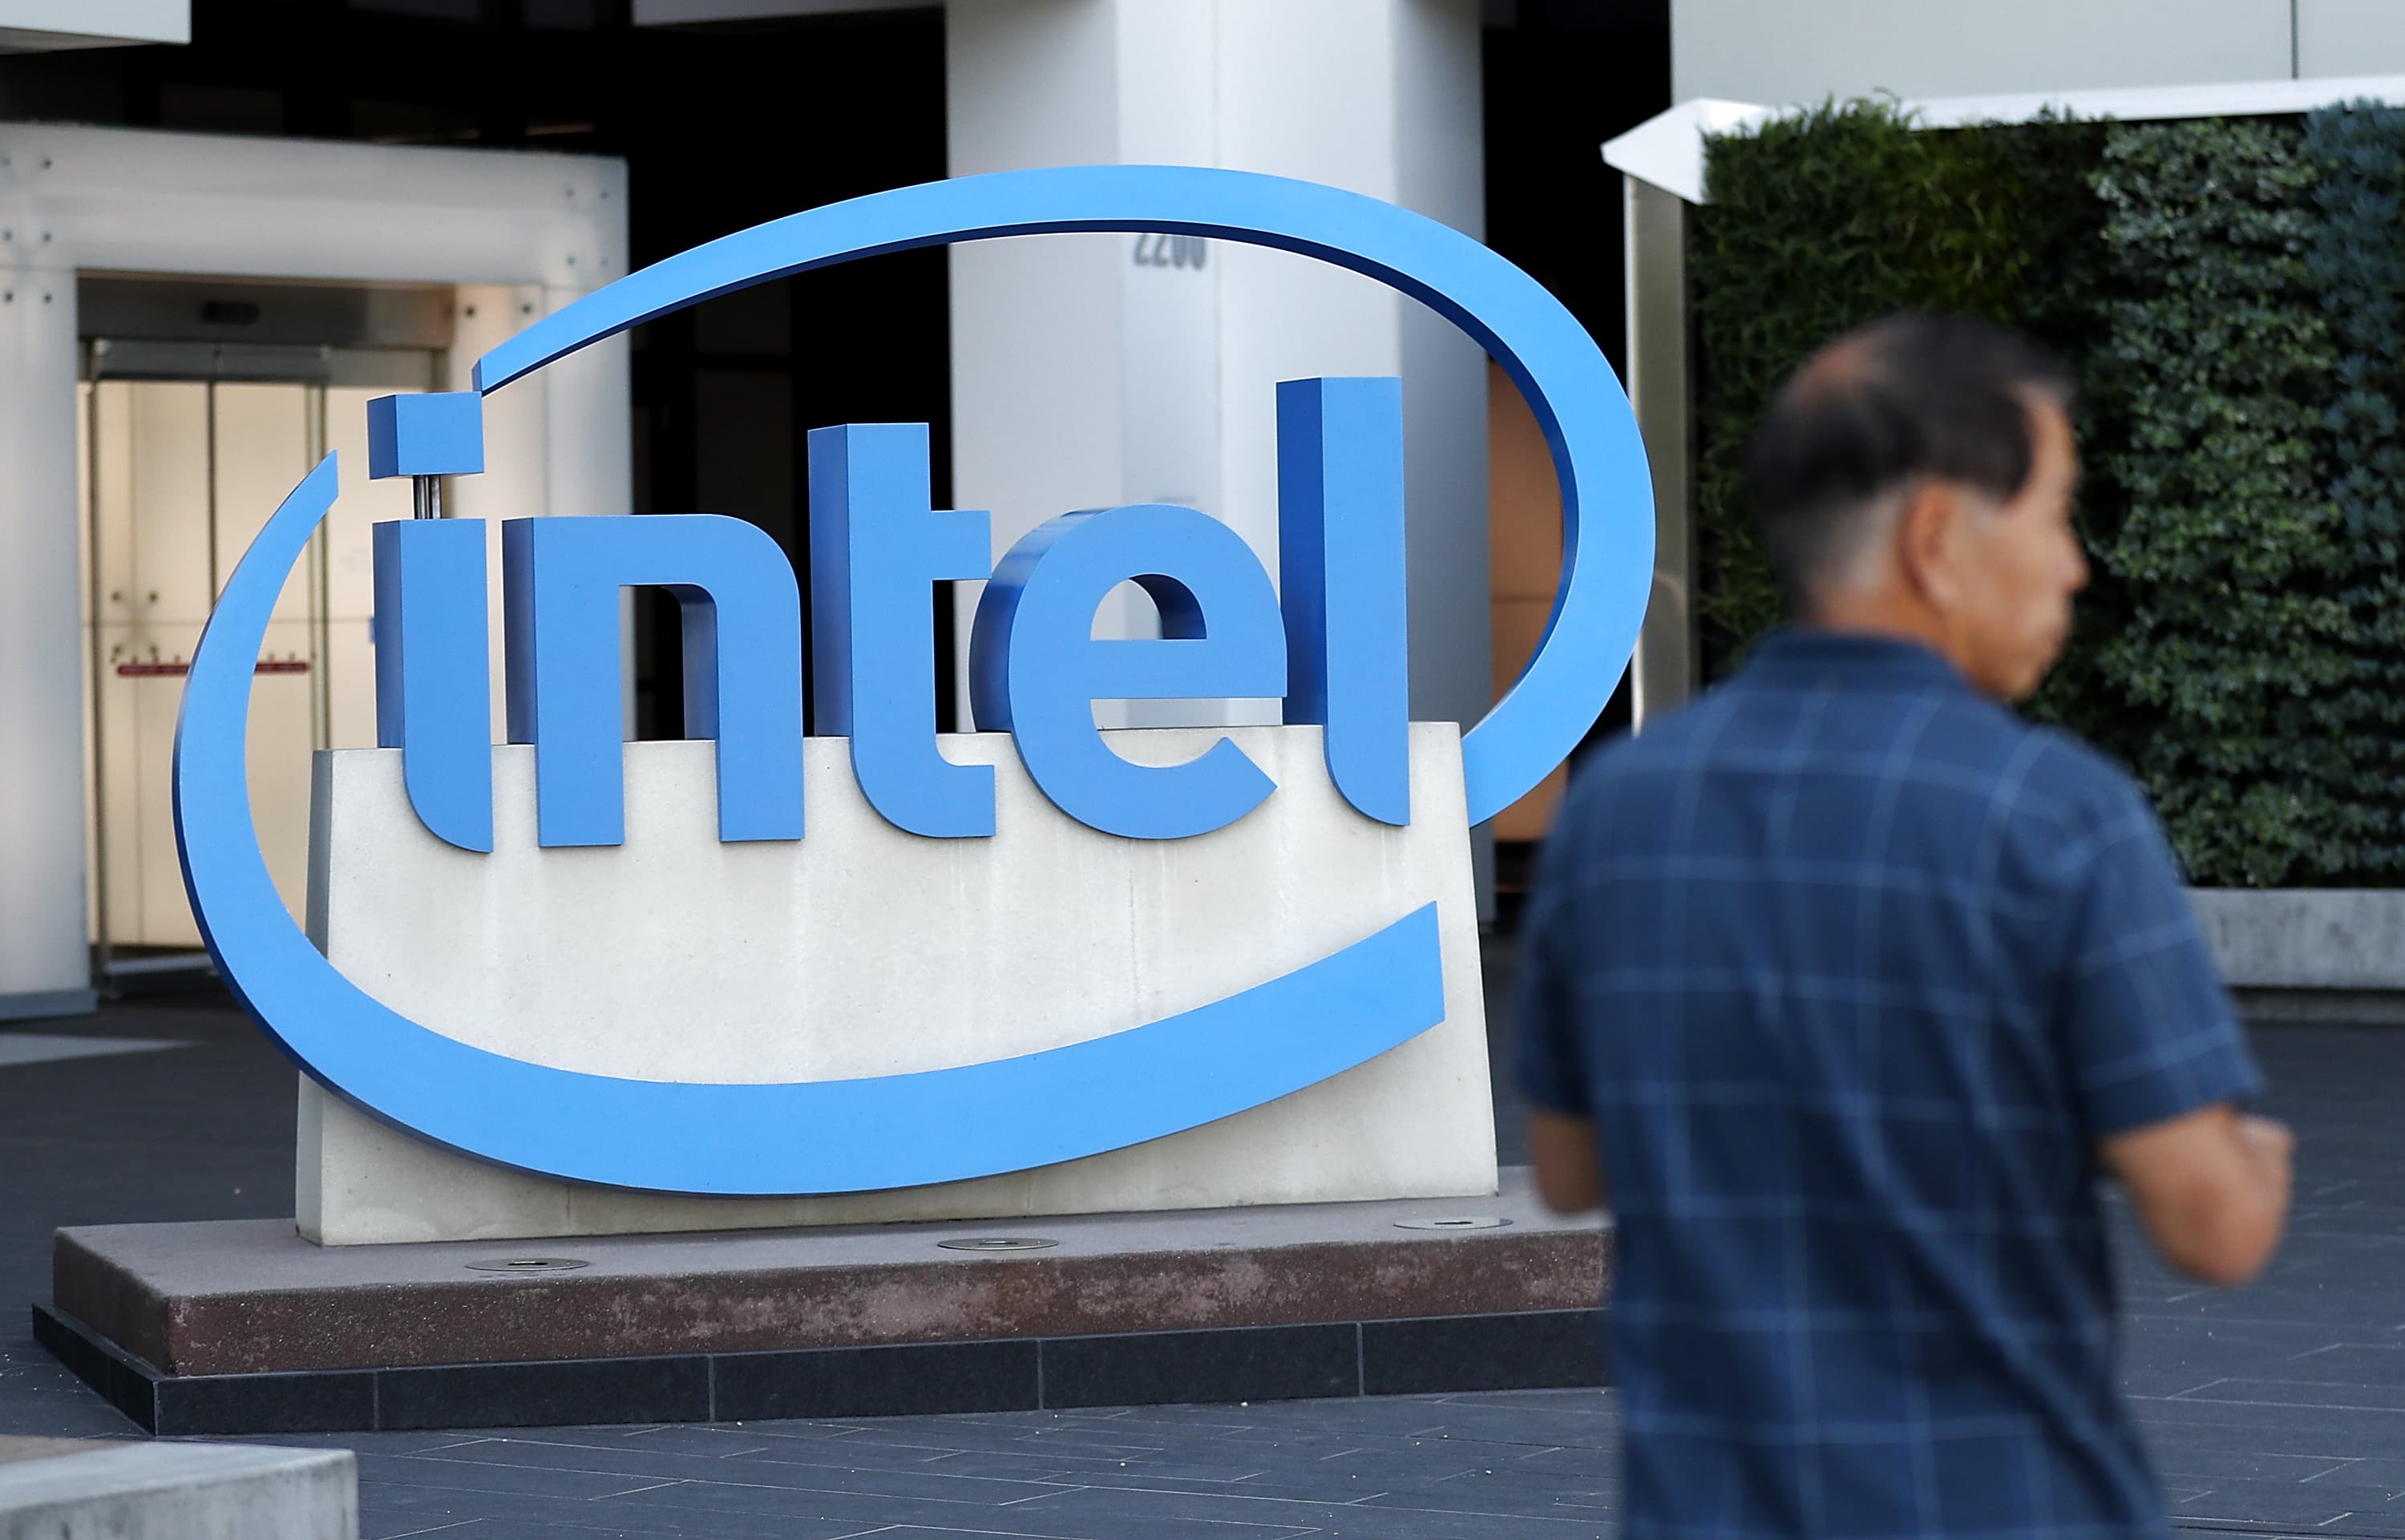 Intel stock slumps after weak data center results, chip delay - CNBC